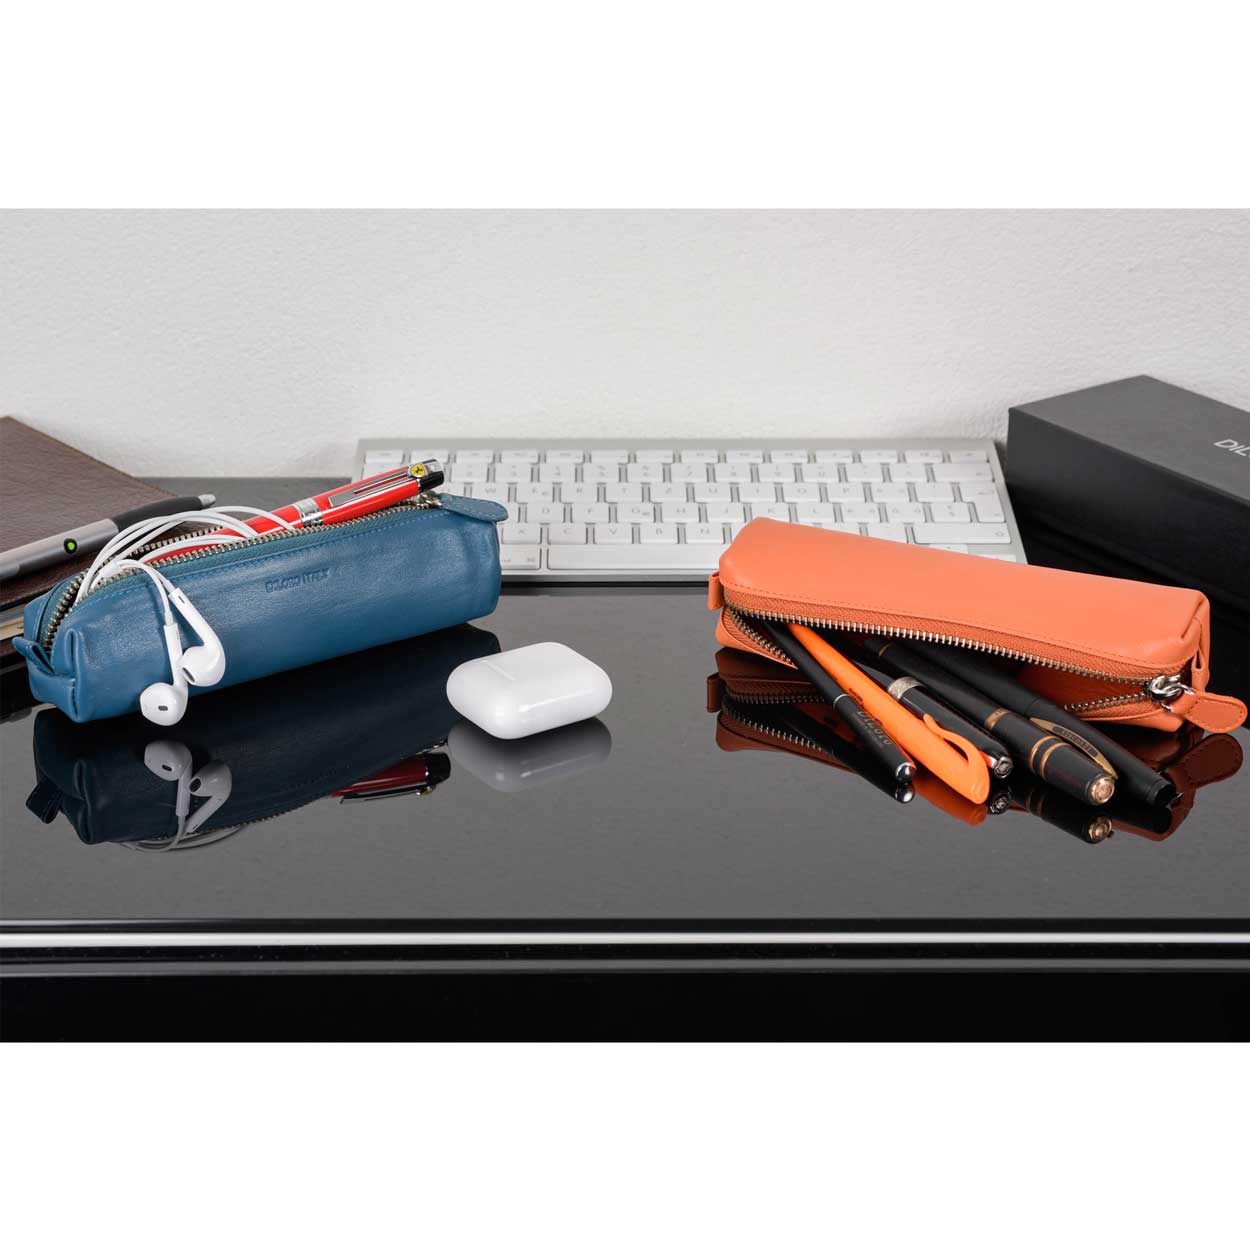 DiLoro Pen & Pencil Case: Color Sololin Blue and Orange with YKK zippered pencil, pen case made from top quality, full grain nappa leather.